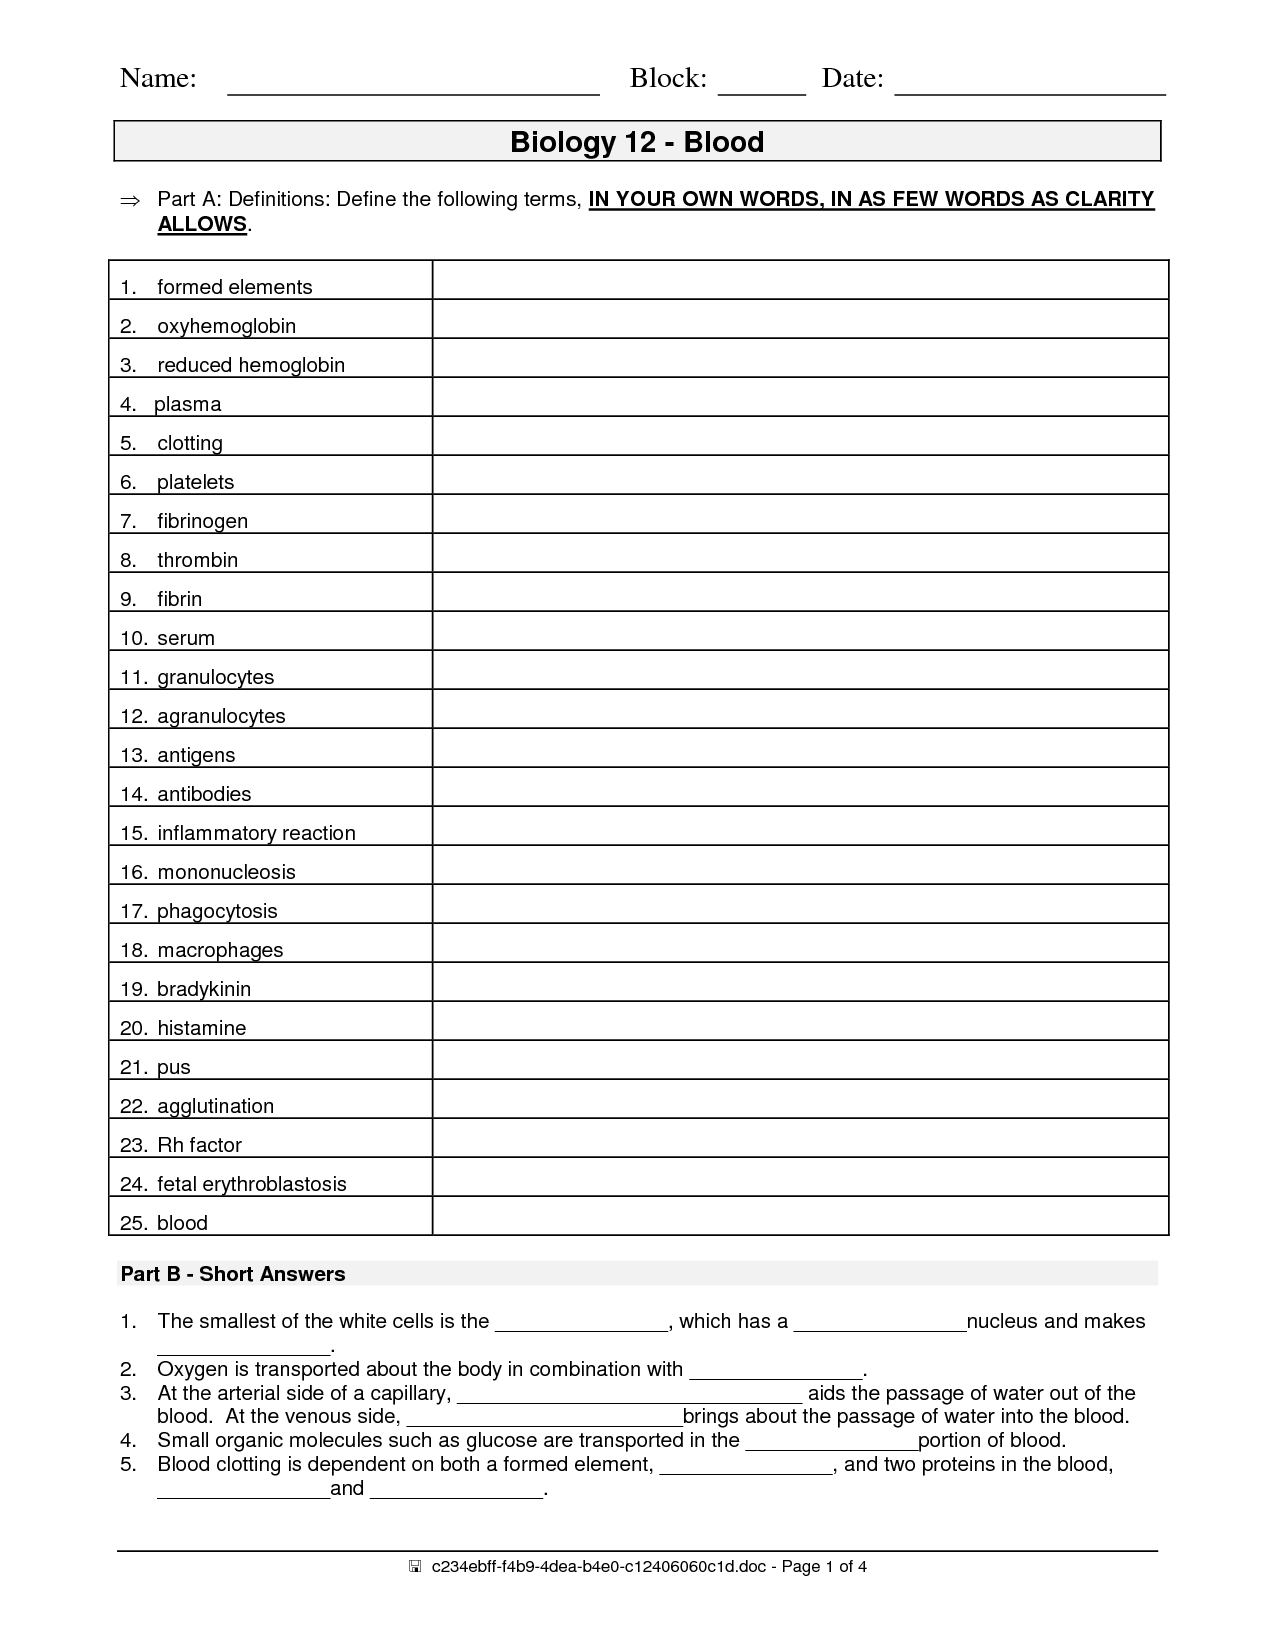 college-anatomy-worksheets-free-download-gmbar-co